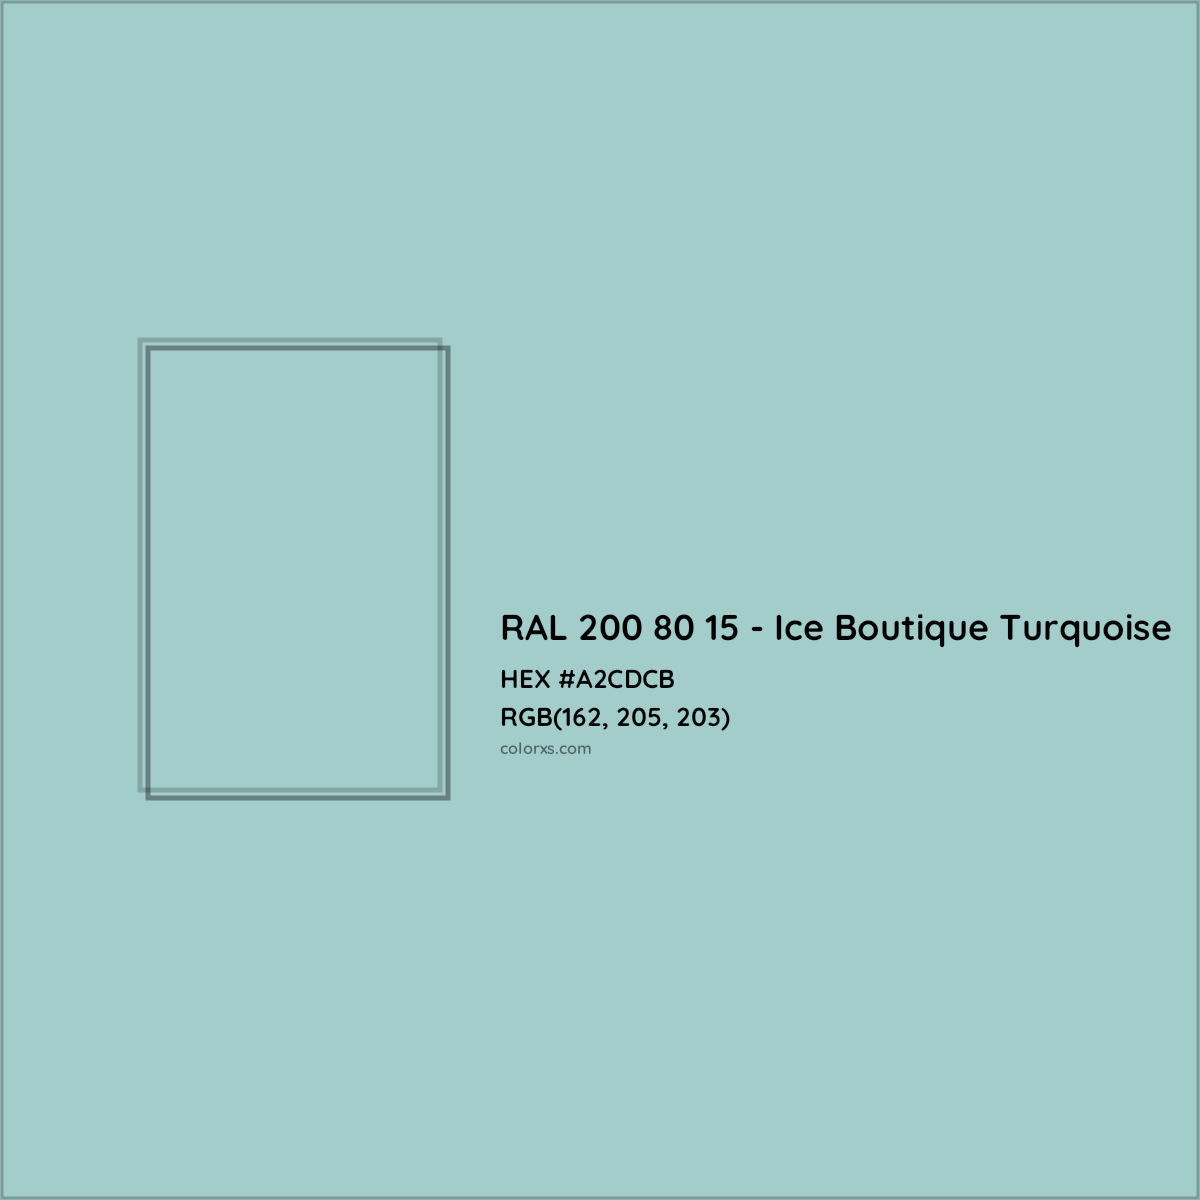 HEX #A2CDCB RAL 200 80 15 - Ice Boutique Turquoise CMS RAL Design - Color Code